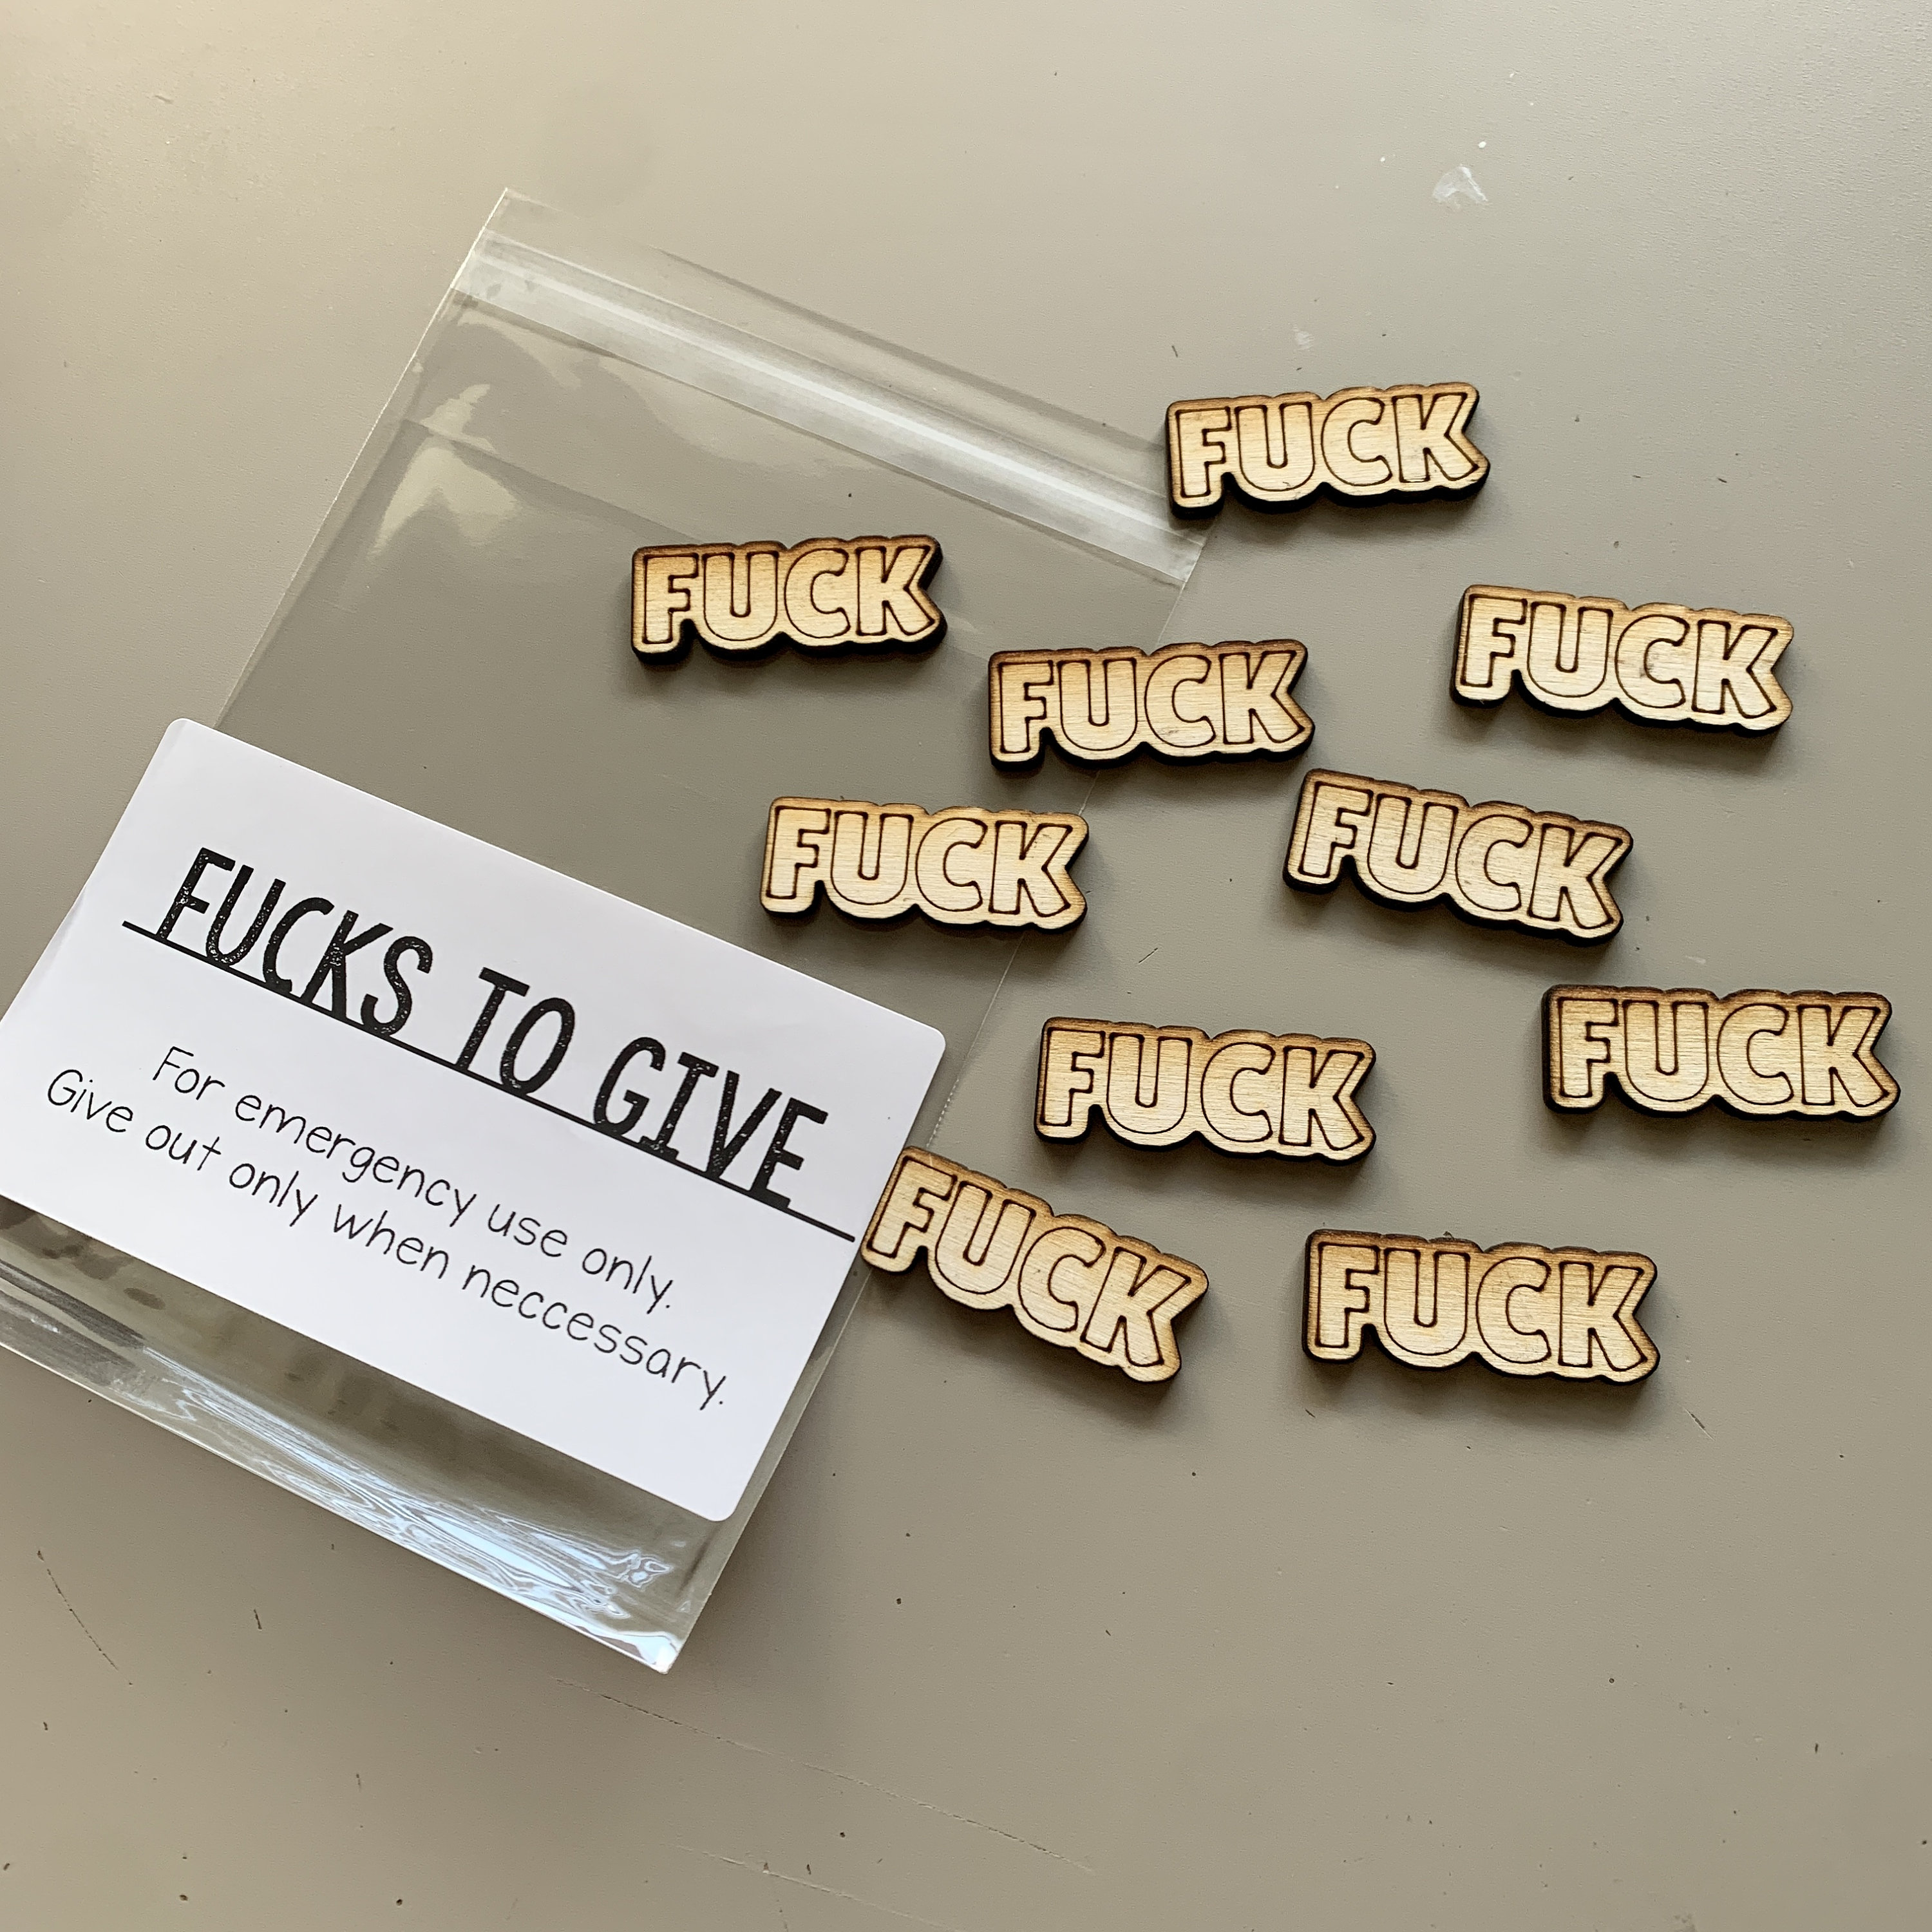  Sweet Reminder Tokens to Give